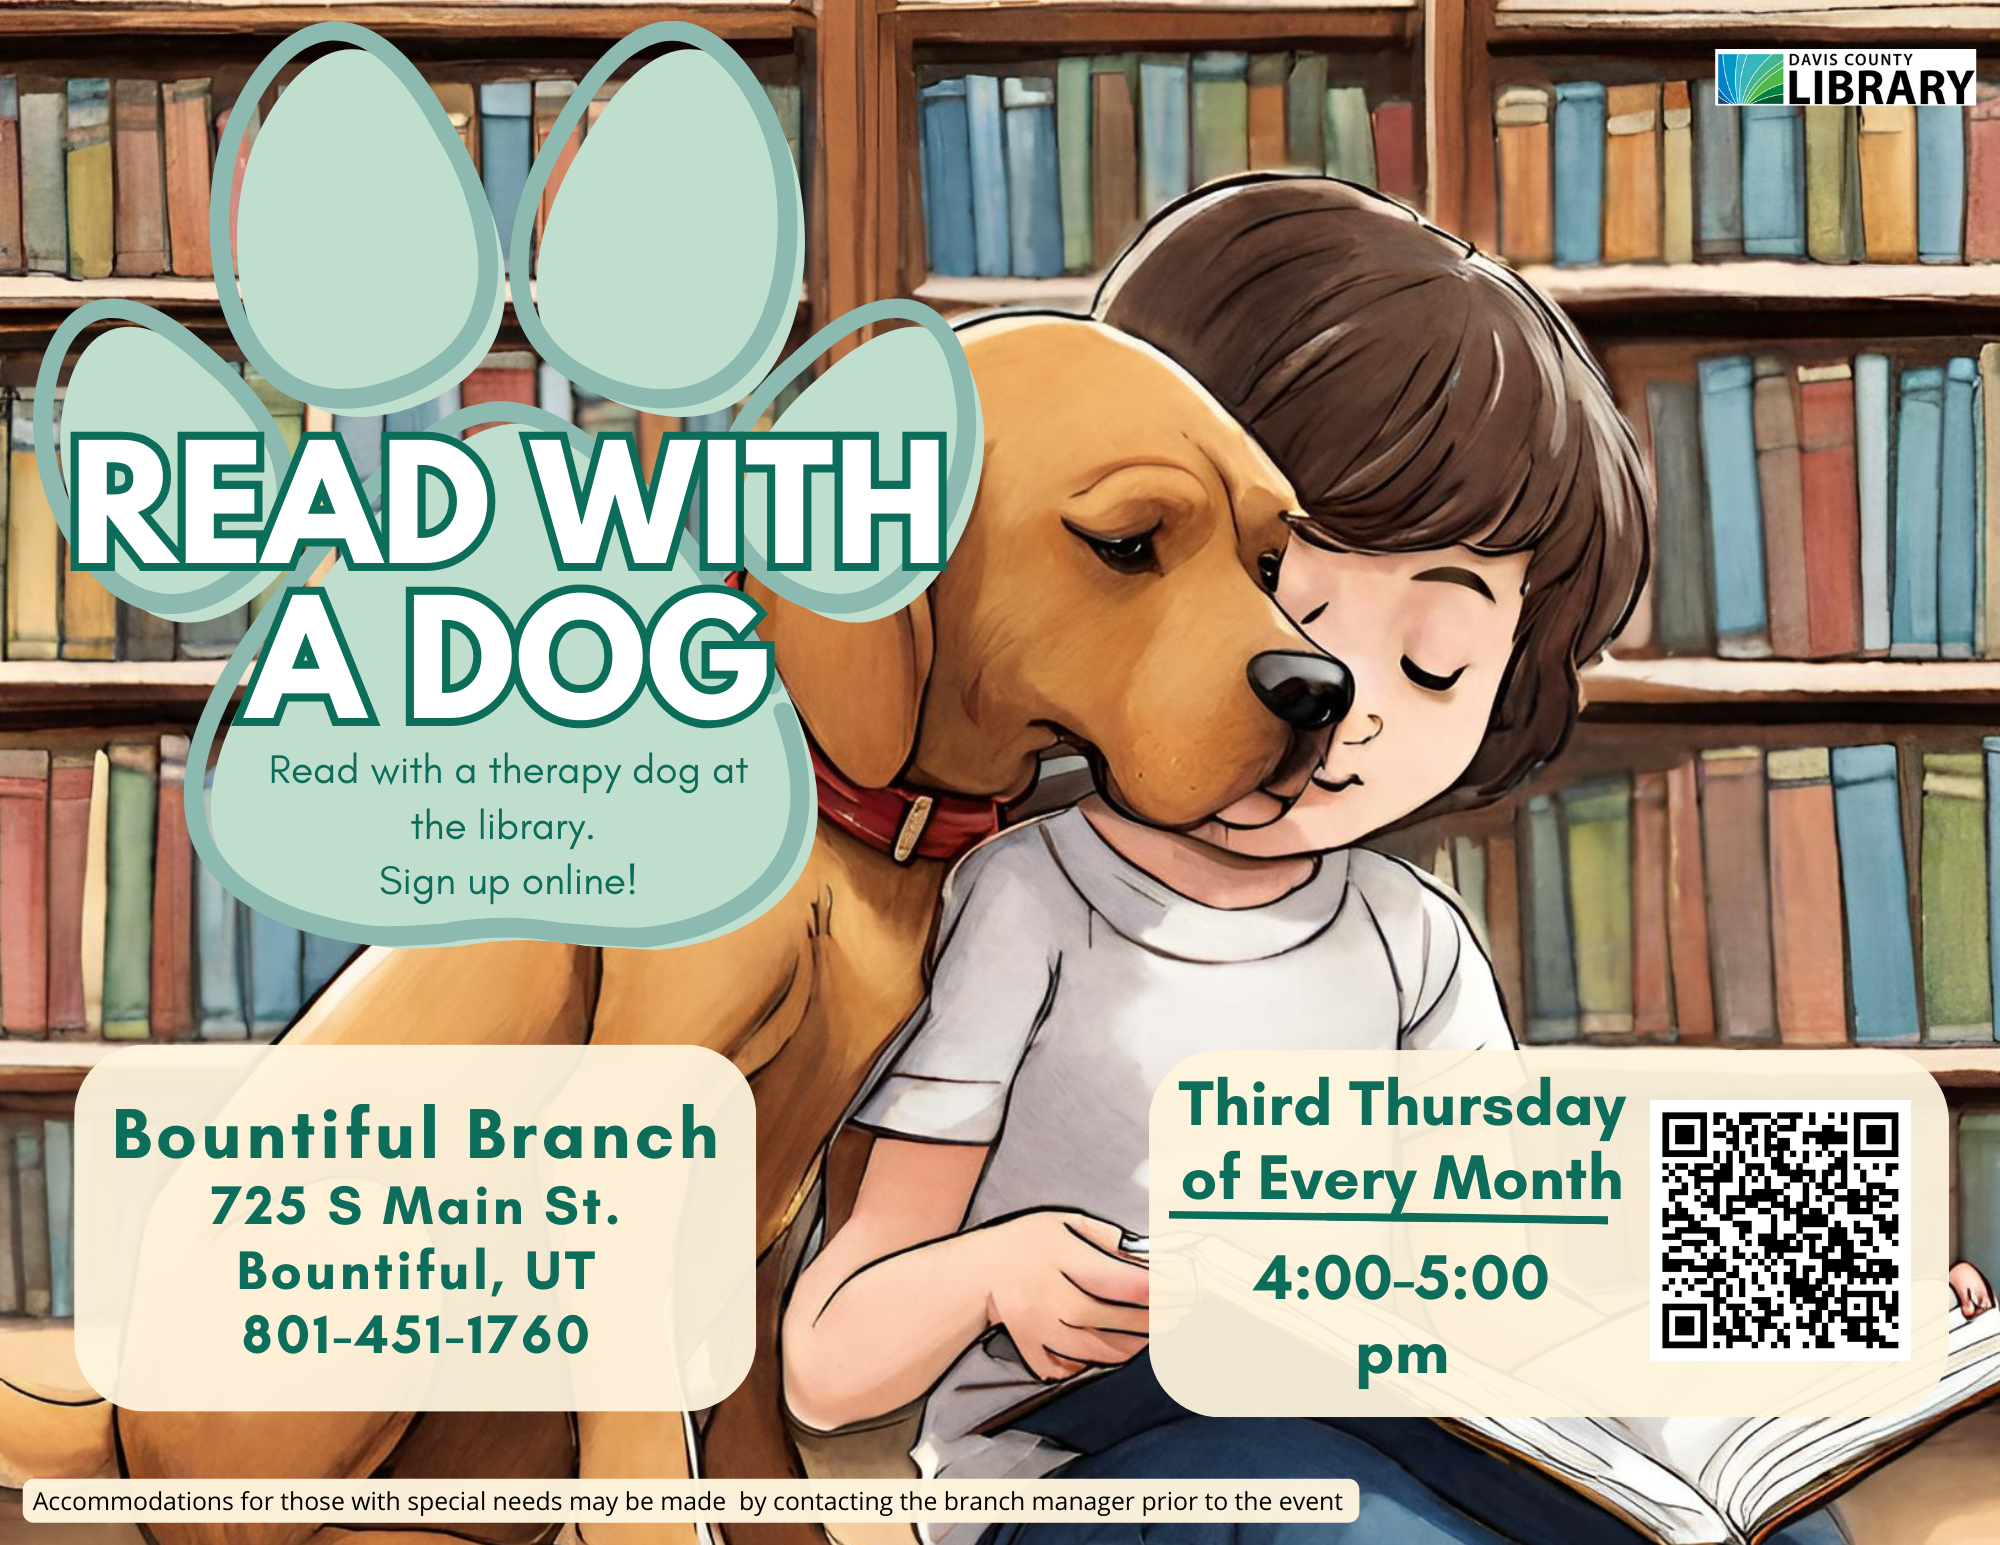 Read with a therapy dog the third Thursday of each month at the Bountiful Branch Library (725 S Main St., Bountiful).  Sign up online on our events/calendar page or call the branch for more details 801-451-1760